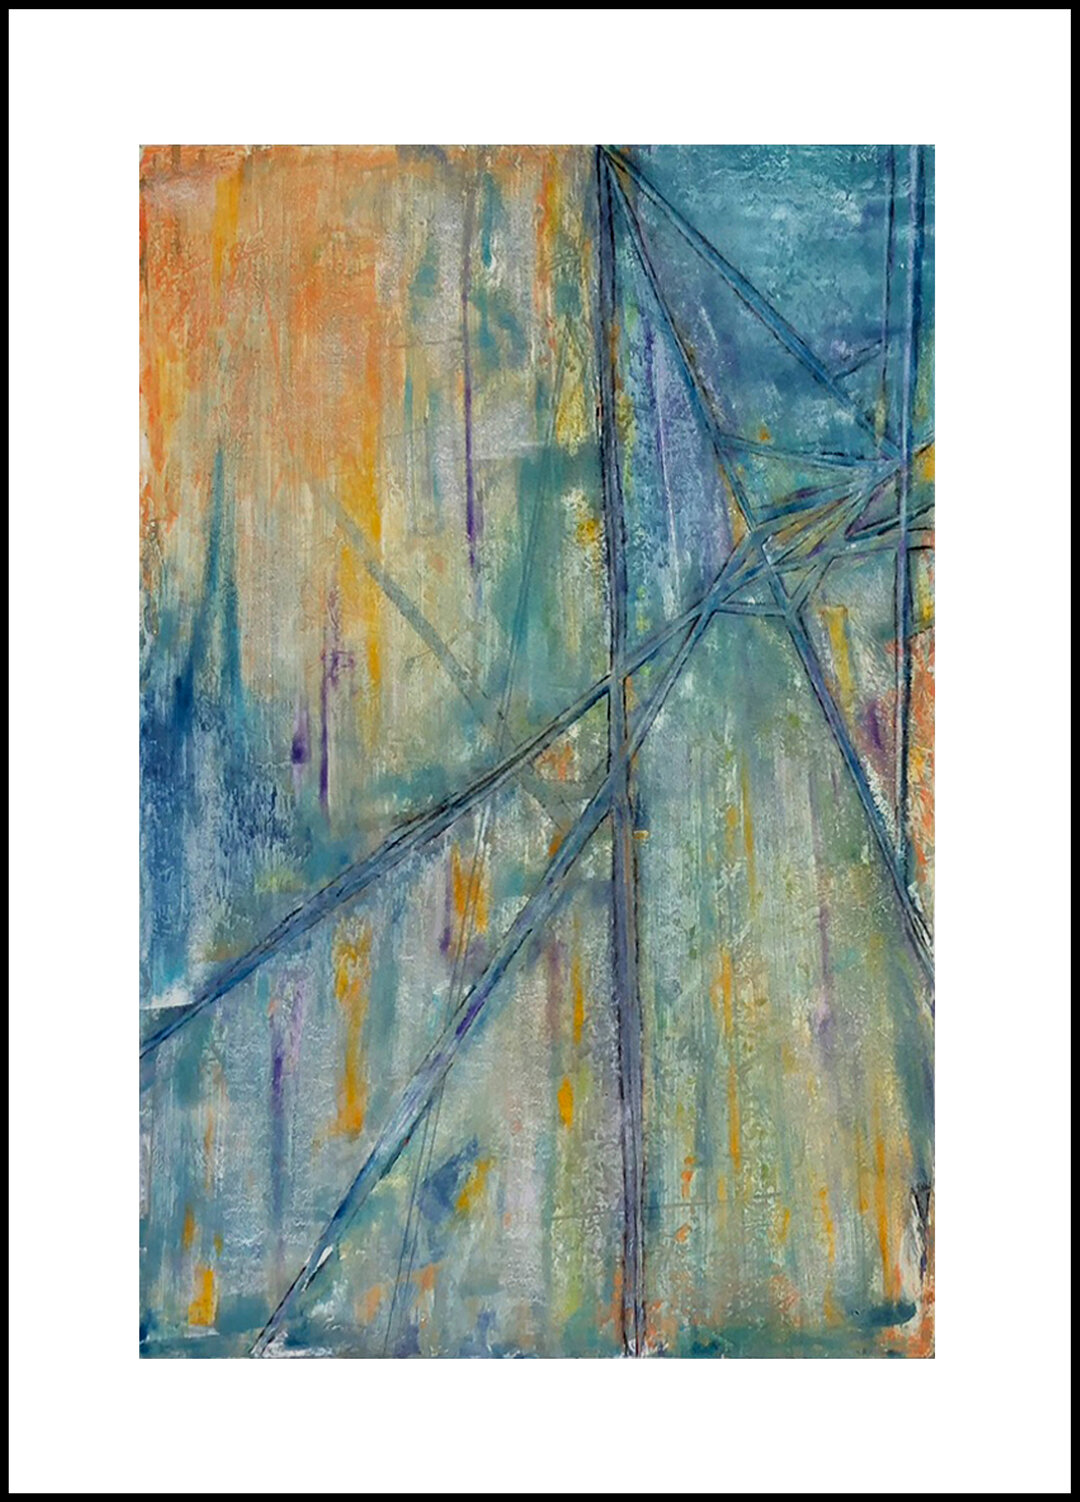    “Follow the Light”   Deep breaths, lost in thought as the sunlight streams through the window. Mixed Media Monoprint, 25 x 33 inches, framed and matted, 1/1  $500 